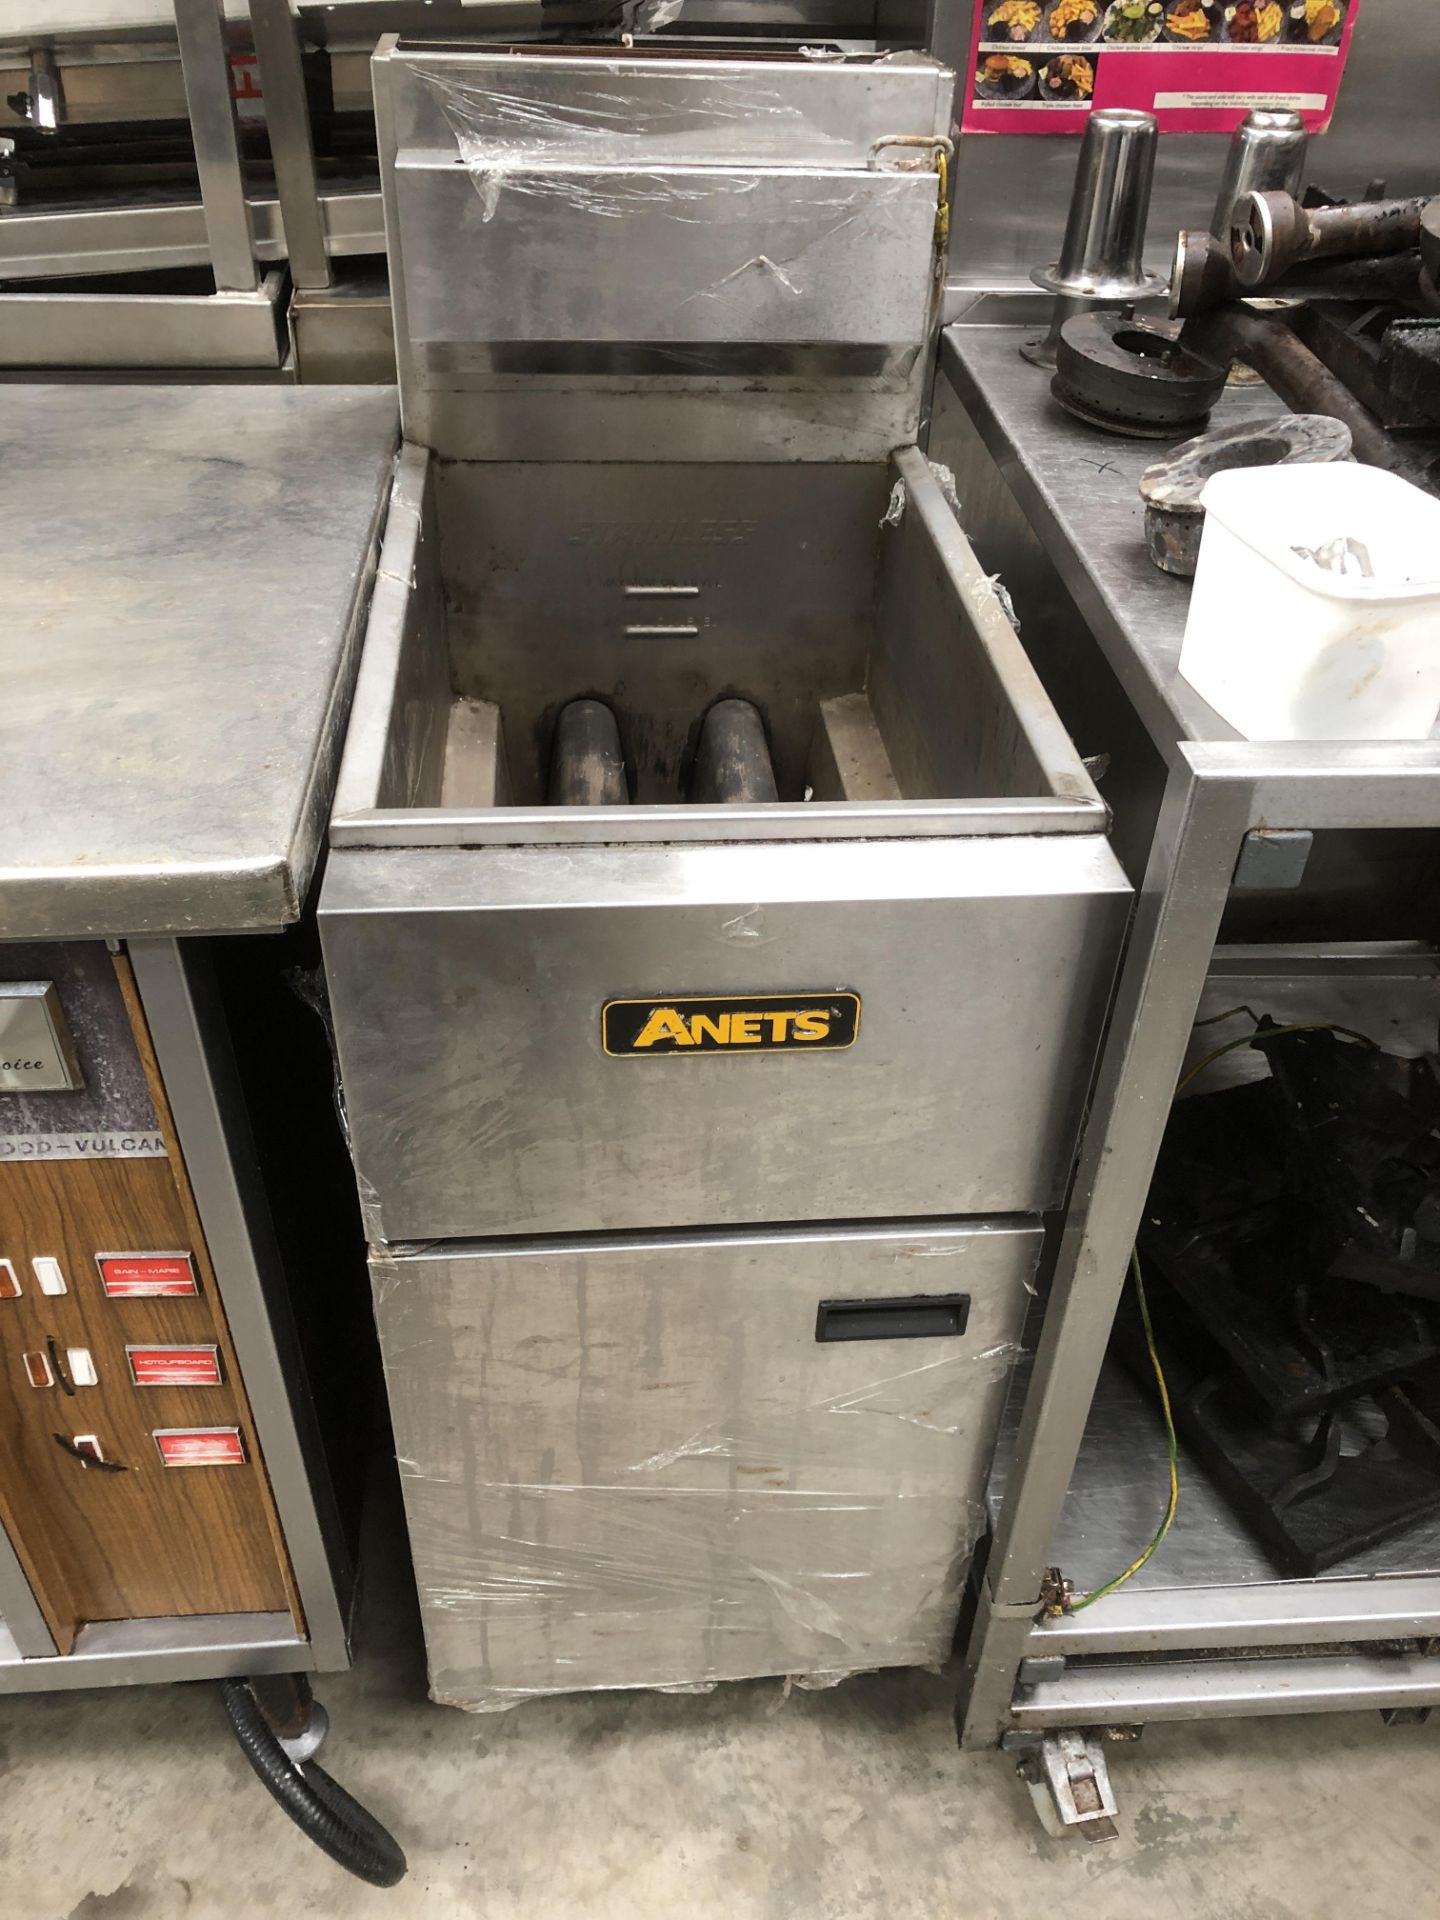 Anets Double Gas Fryer No Baskets